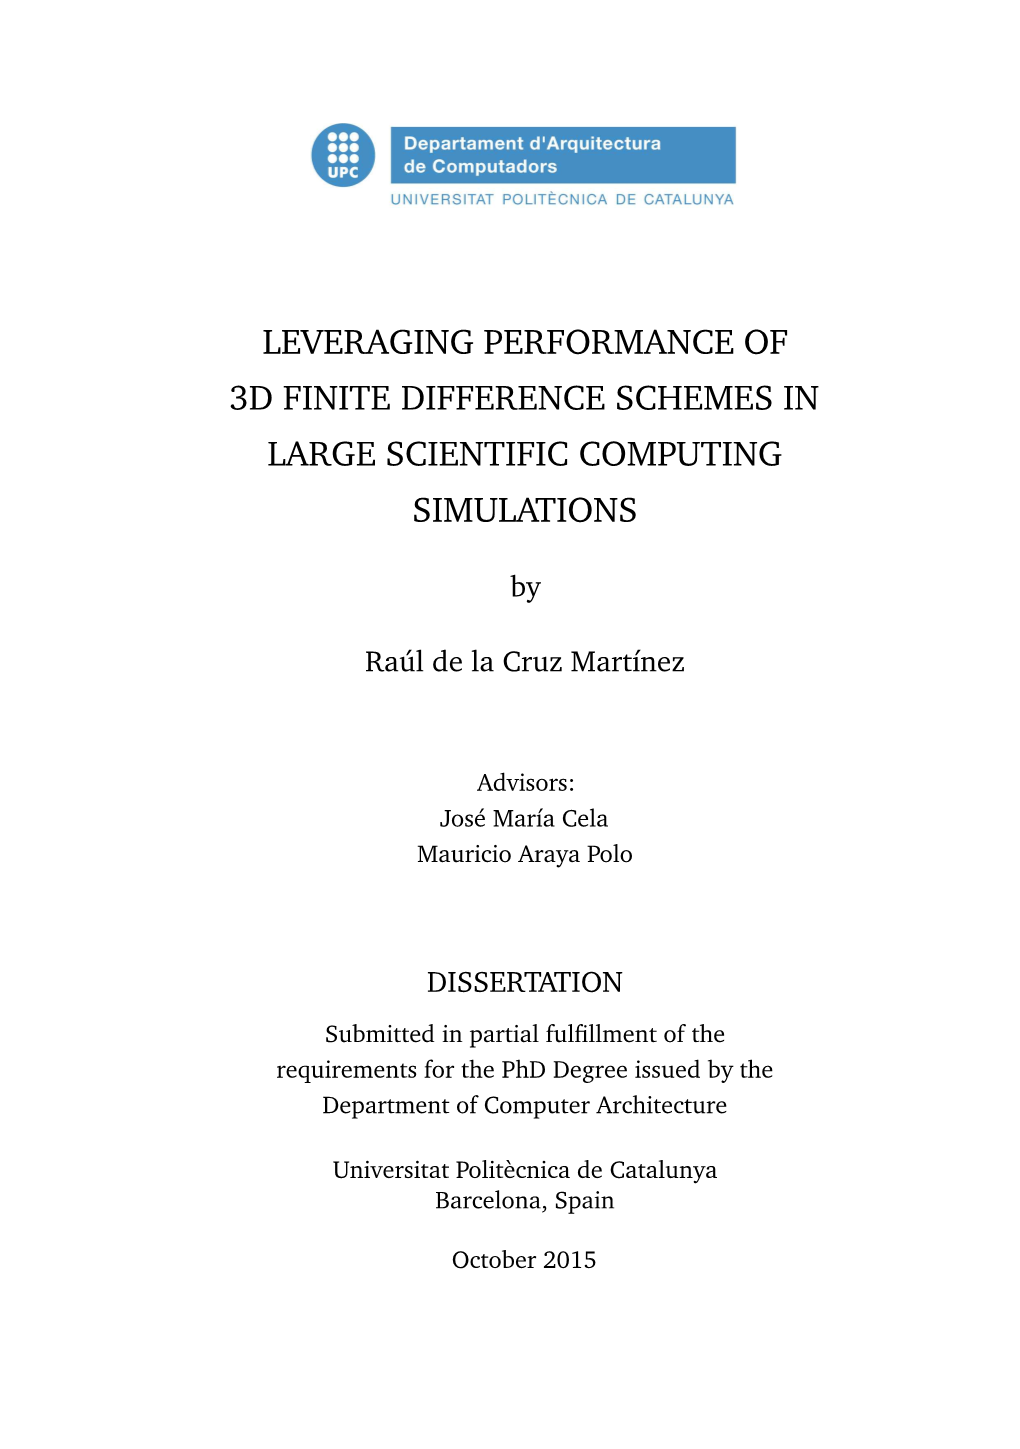 Leveraging Performance of 3D Finite Difference Schemes in Large Scientific Computing Simulations